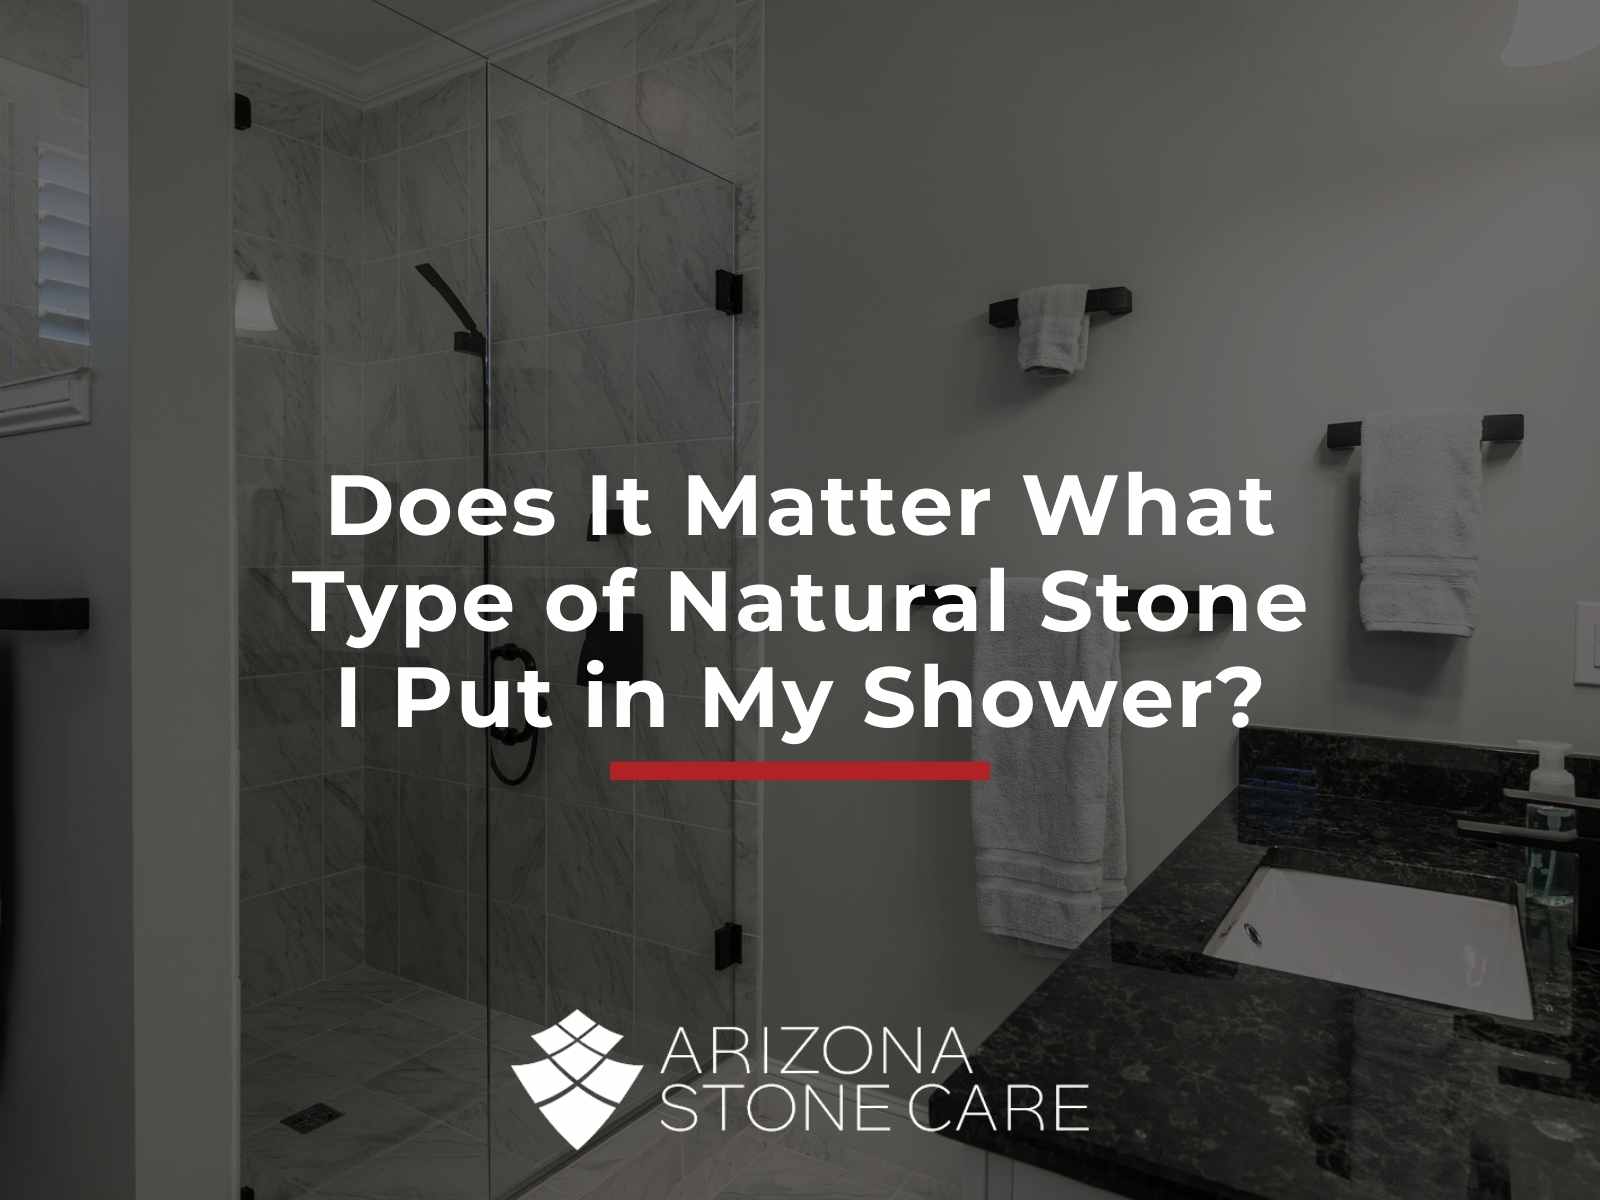 Does It Matter What Type Of Natural Stone I Put In My Shower?